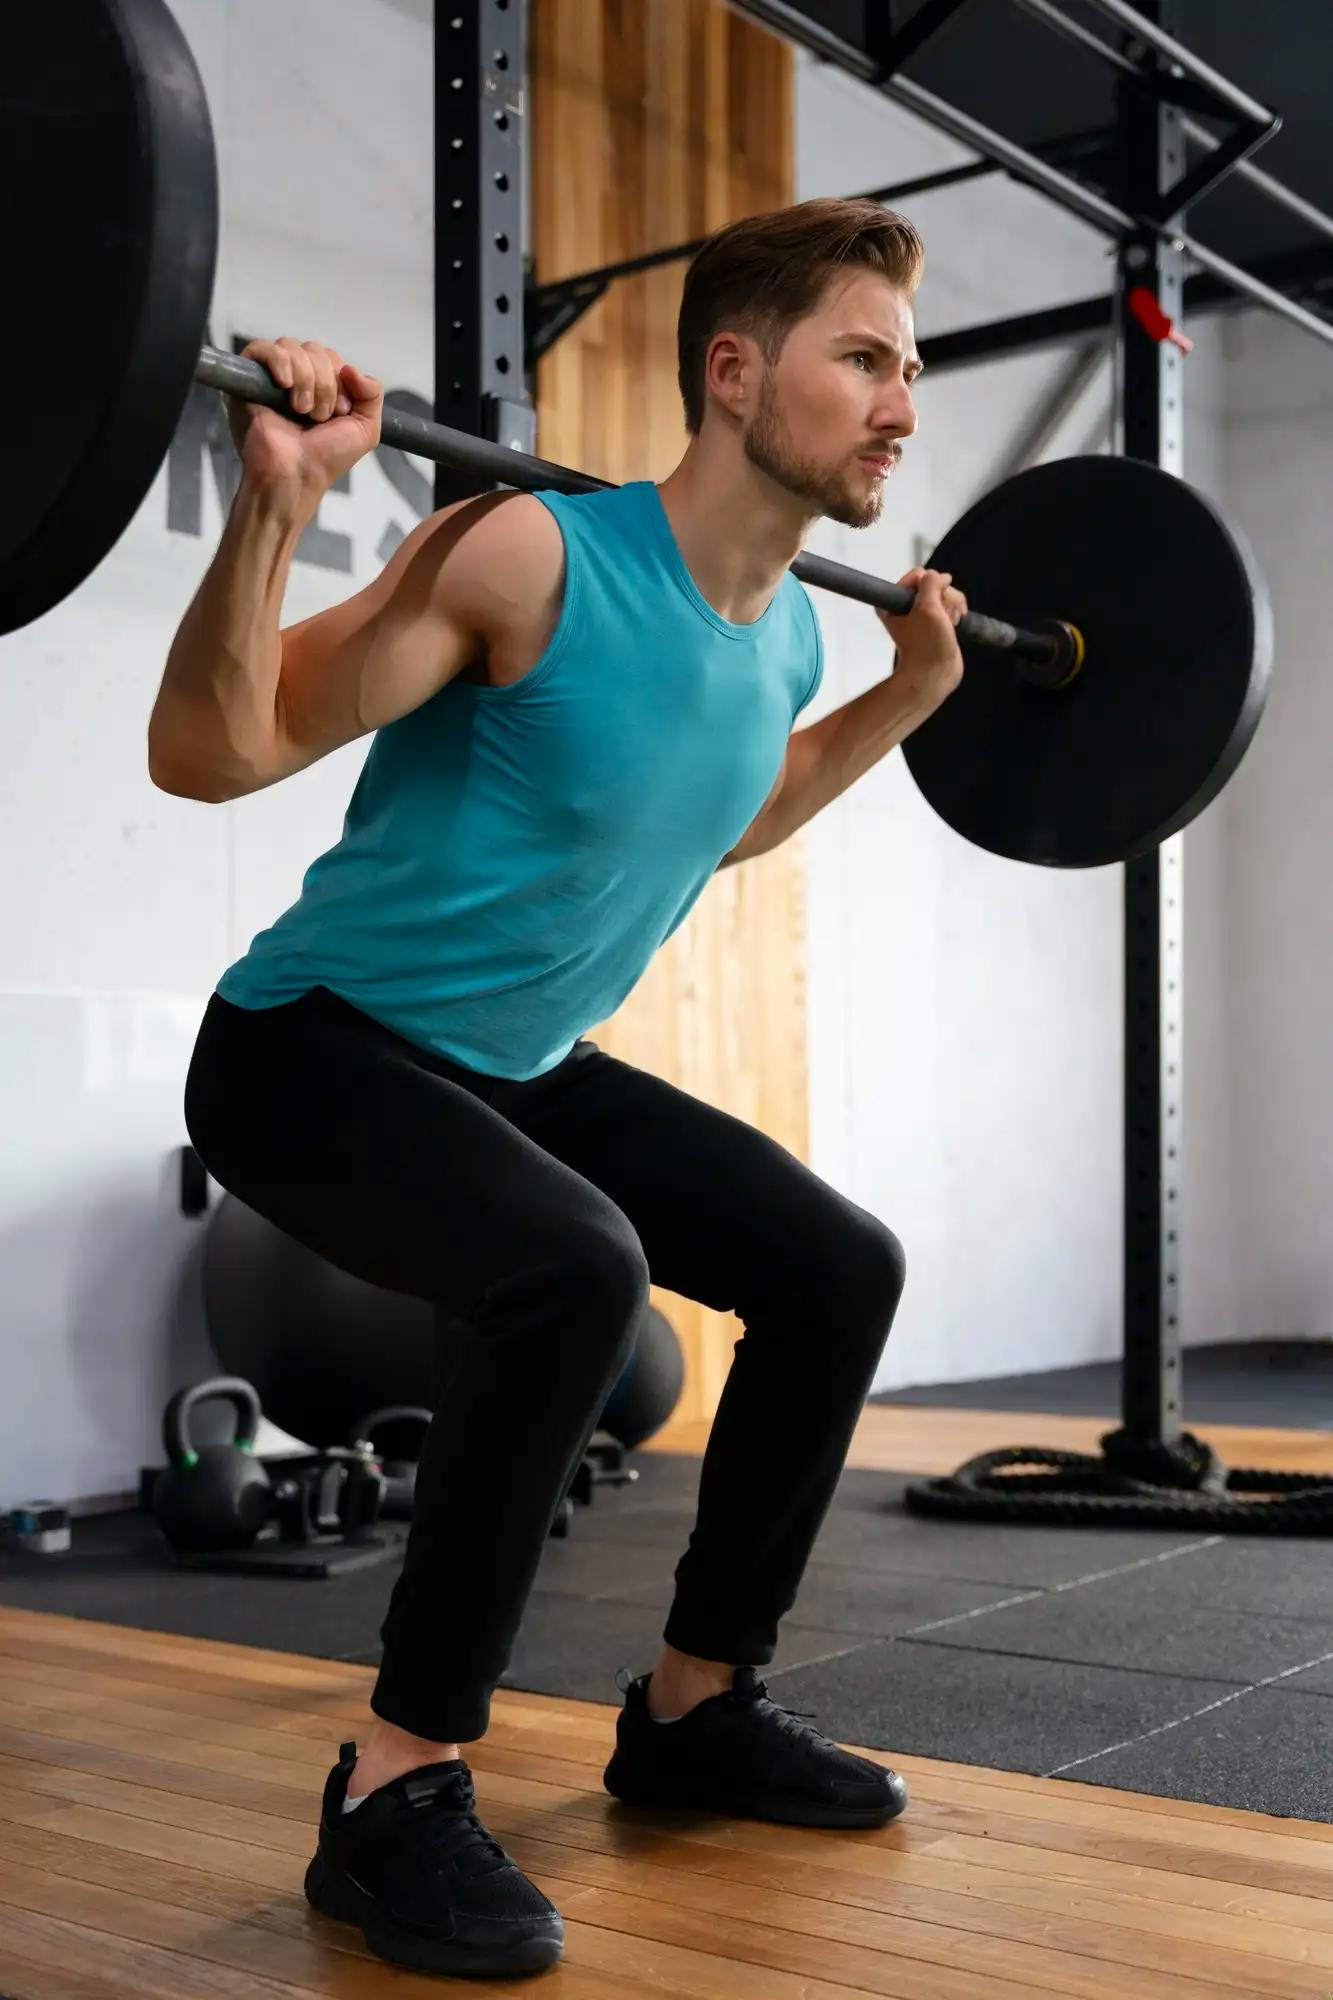 man squats with a barbell in the gym